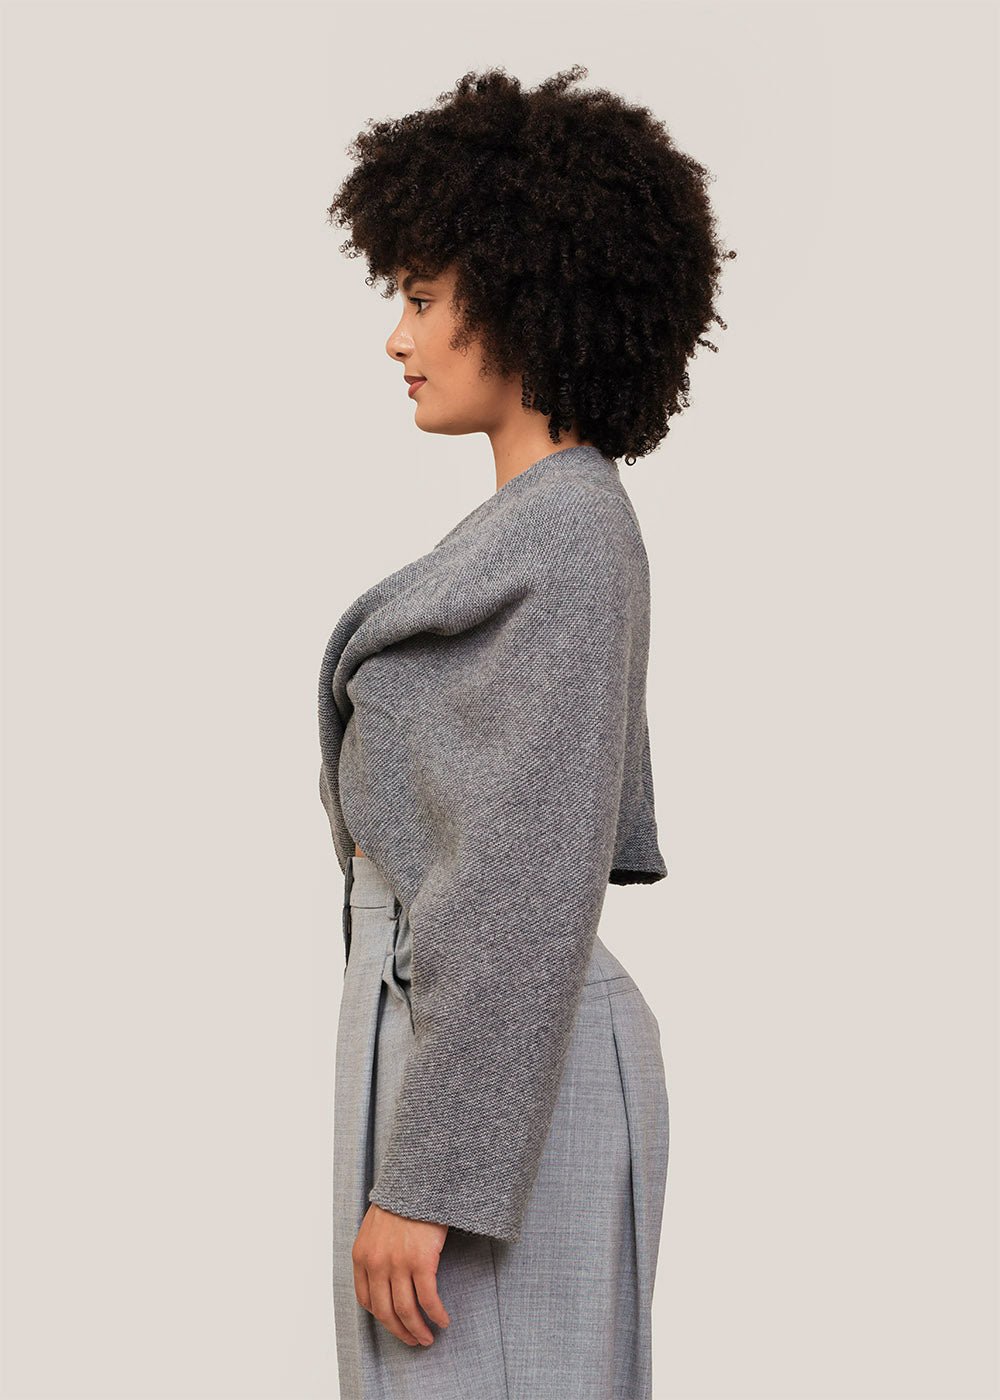 Beaufille Grey Twist Sweater - New Classics Studios Sustainable Ethical Fashion Canada